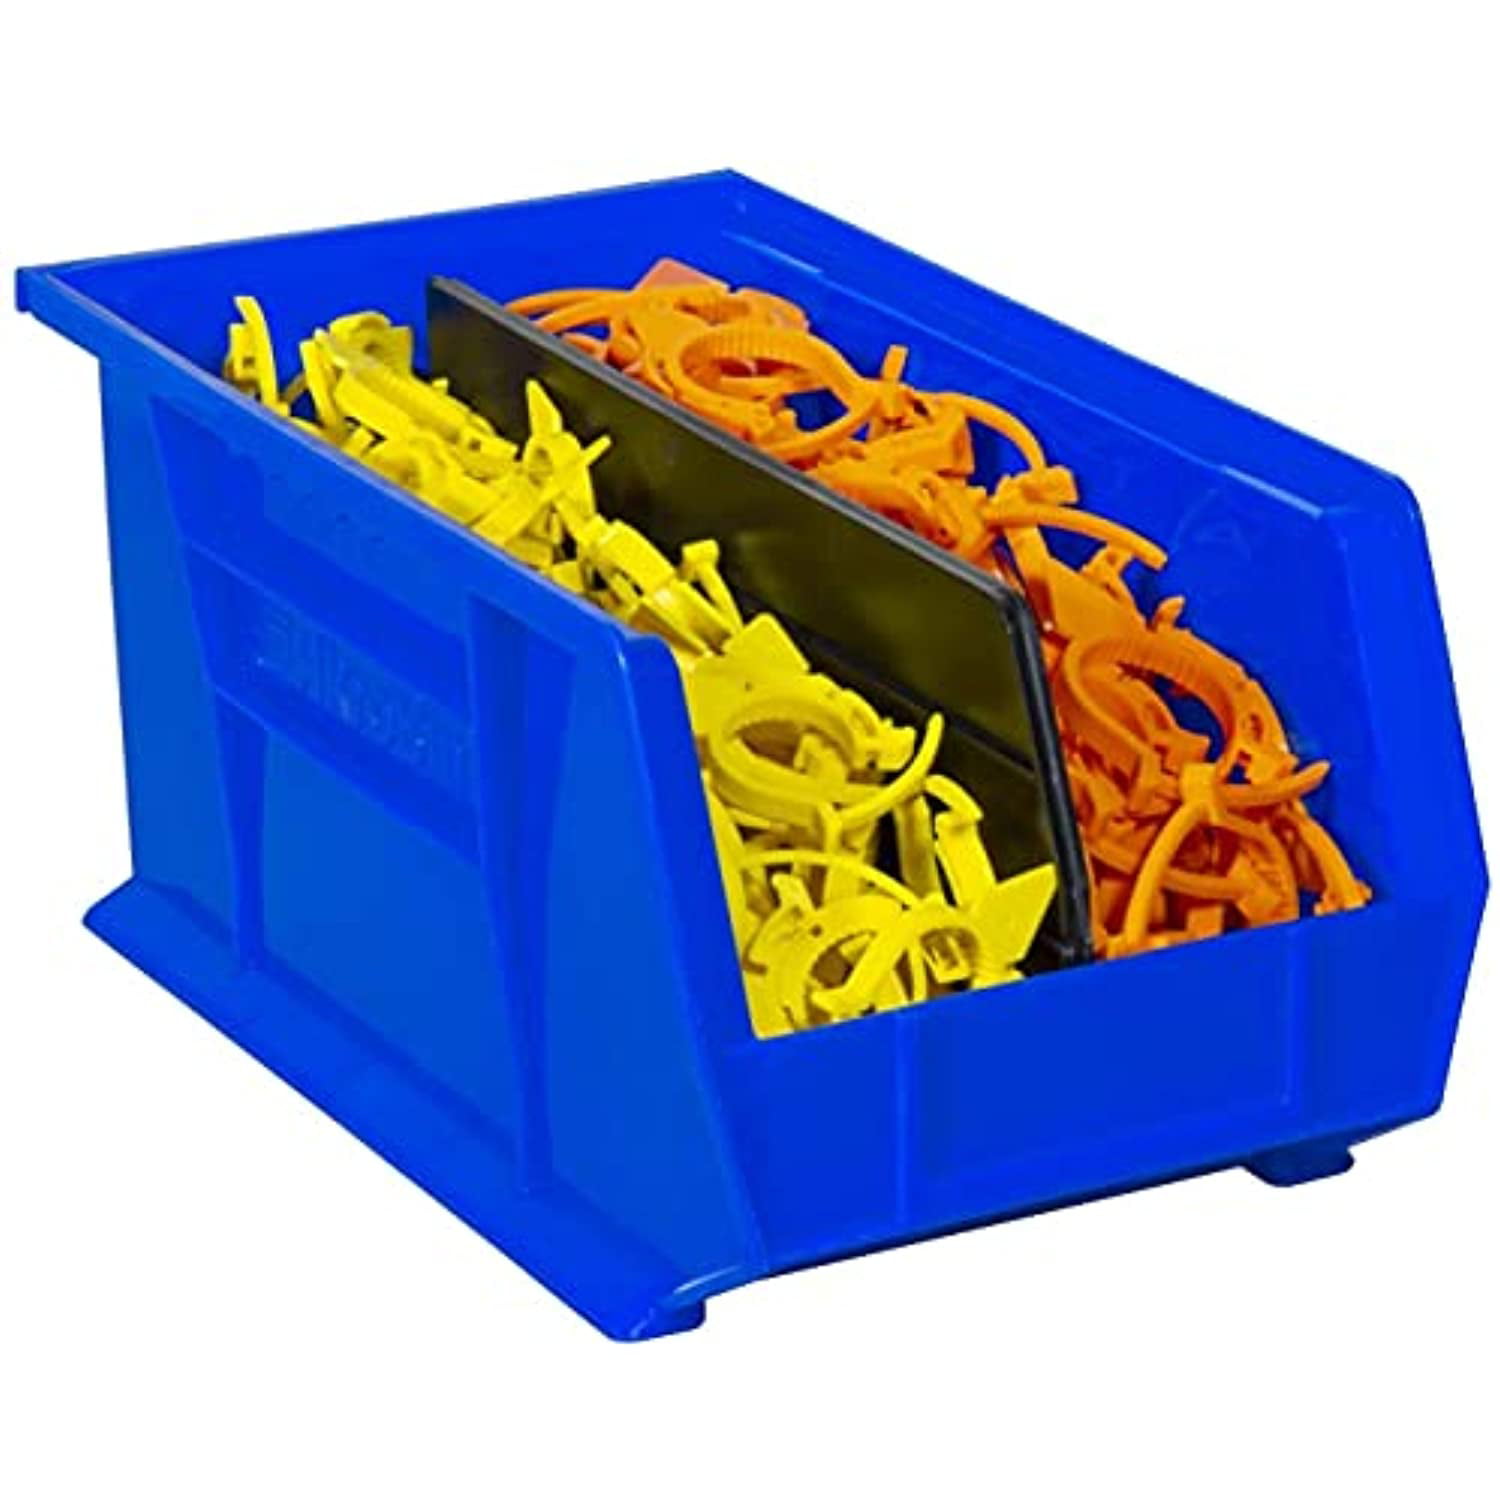 12-Pack Blue Akro-Mils 30240 Plastic Storage Stacking Hanging Akro Bin 15-Inch by 8-Inch by 7-Inch